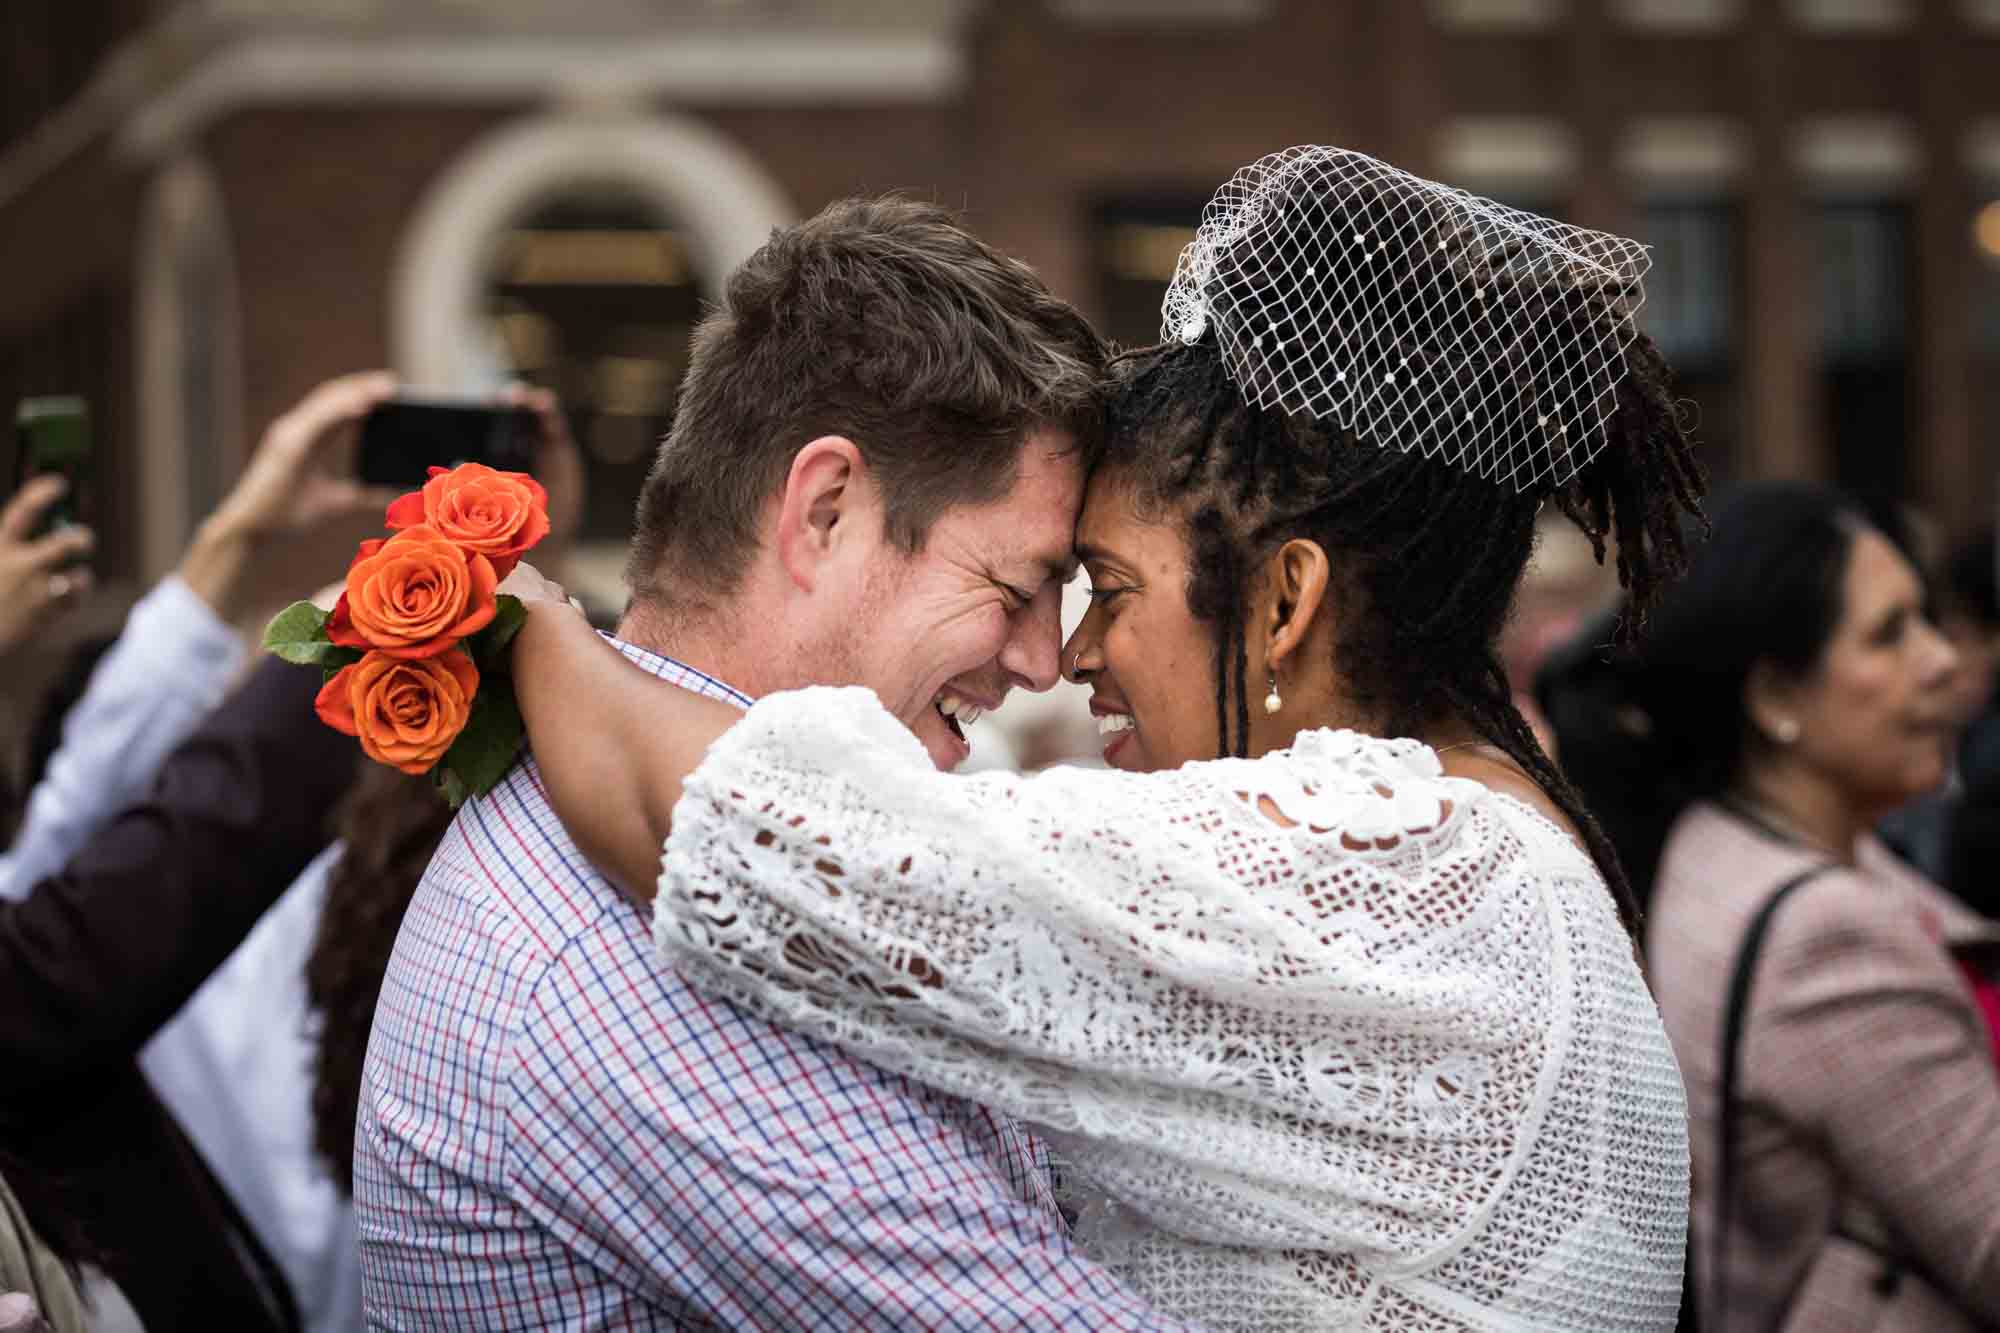 Bride wearing veil hat hugging groom and holding orange flowers for an article on the Bexar county mass wedding event